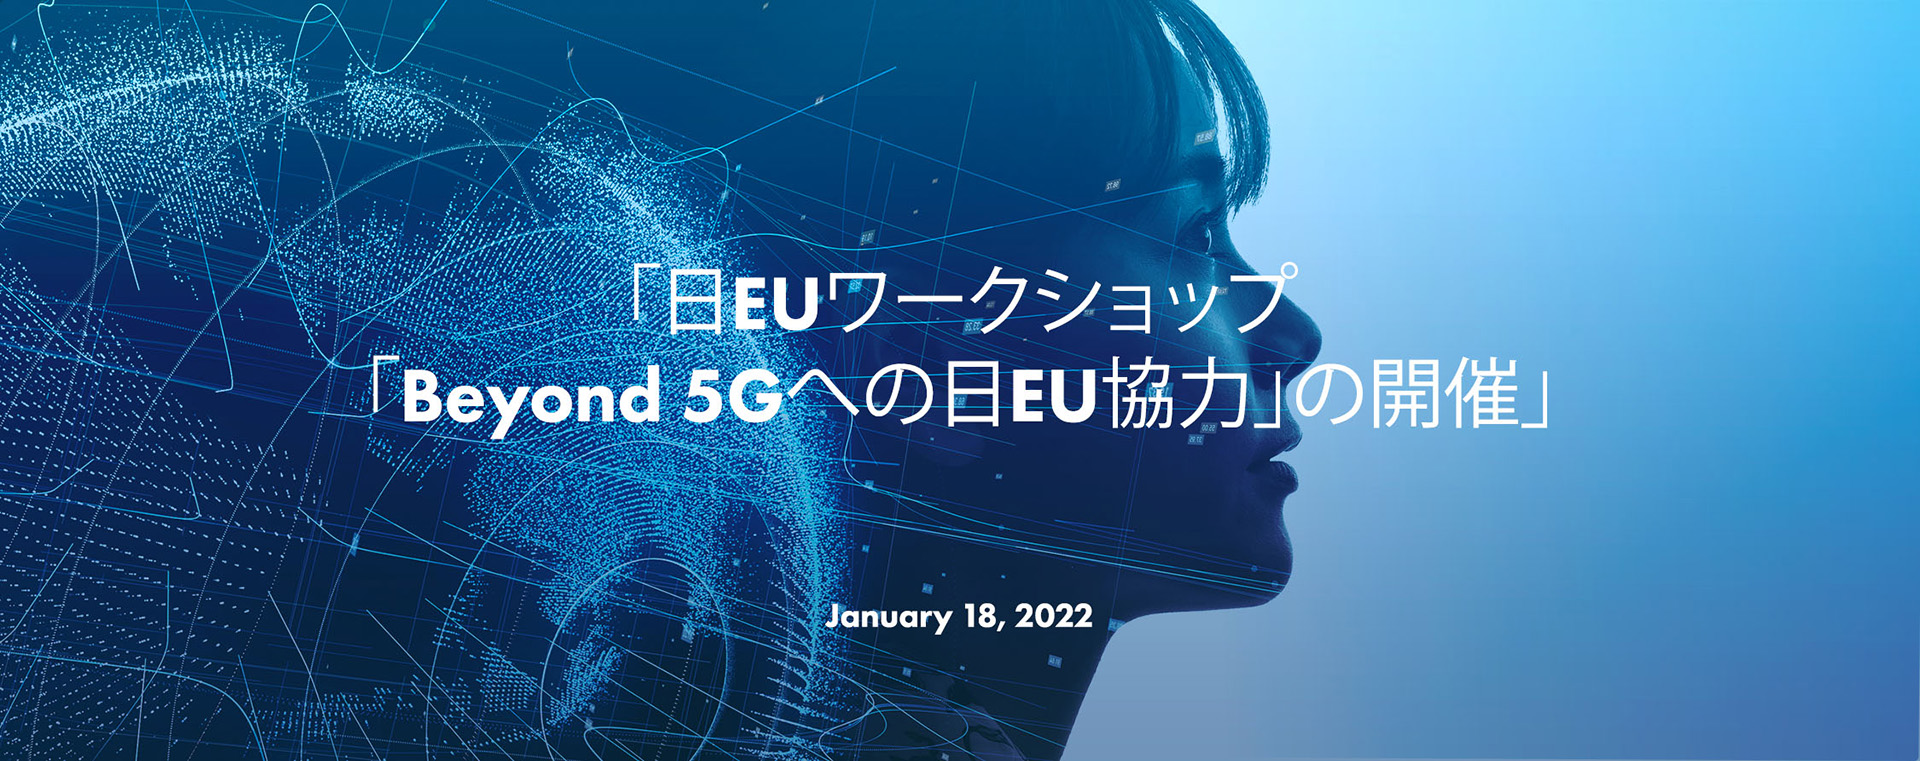 A second EU-Japan workshop was held on January 18, 2022 on Beyond 5G research and standardization